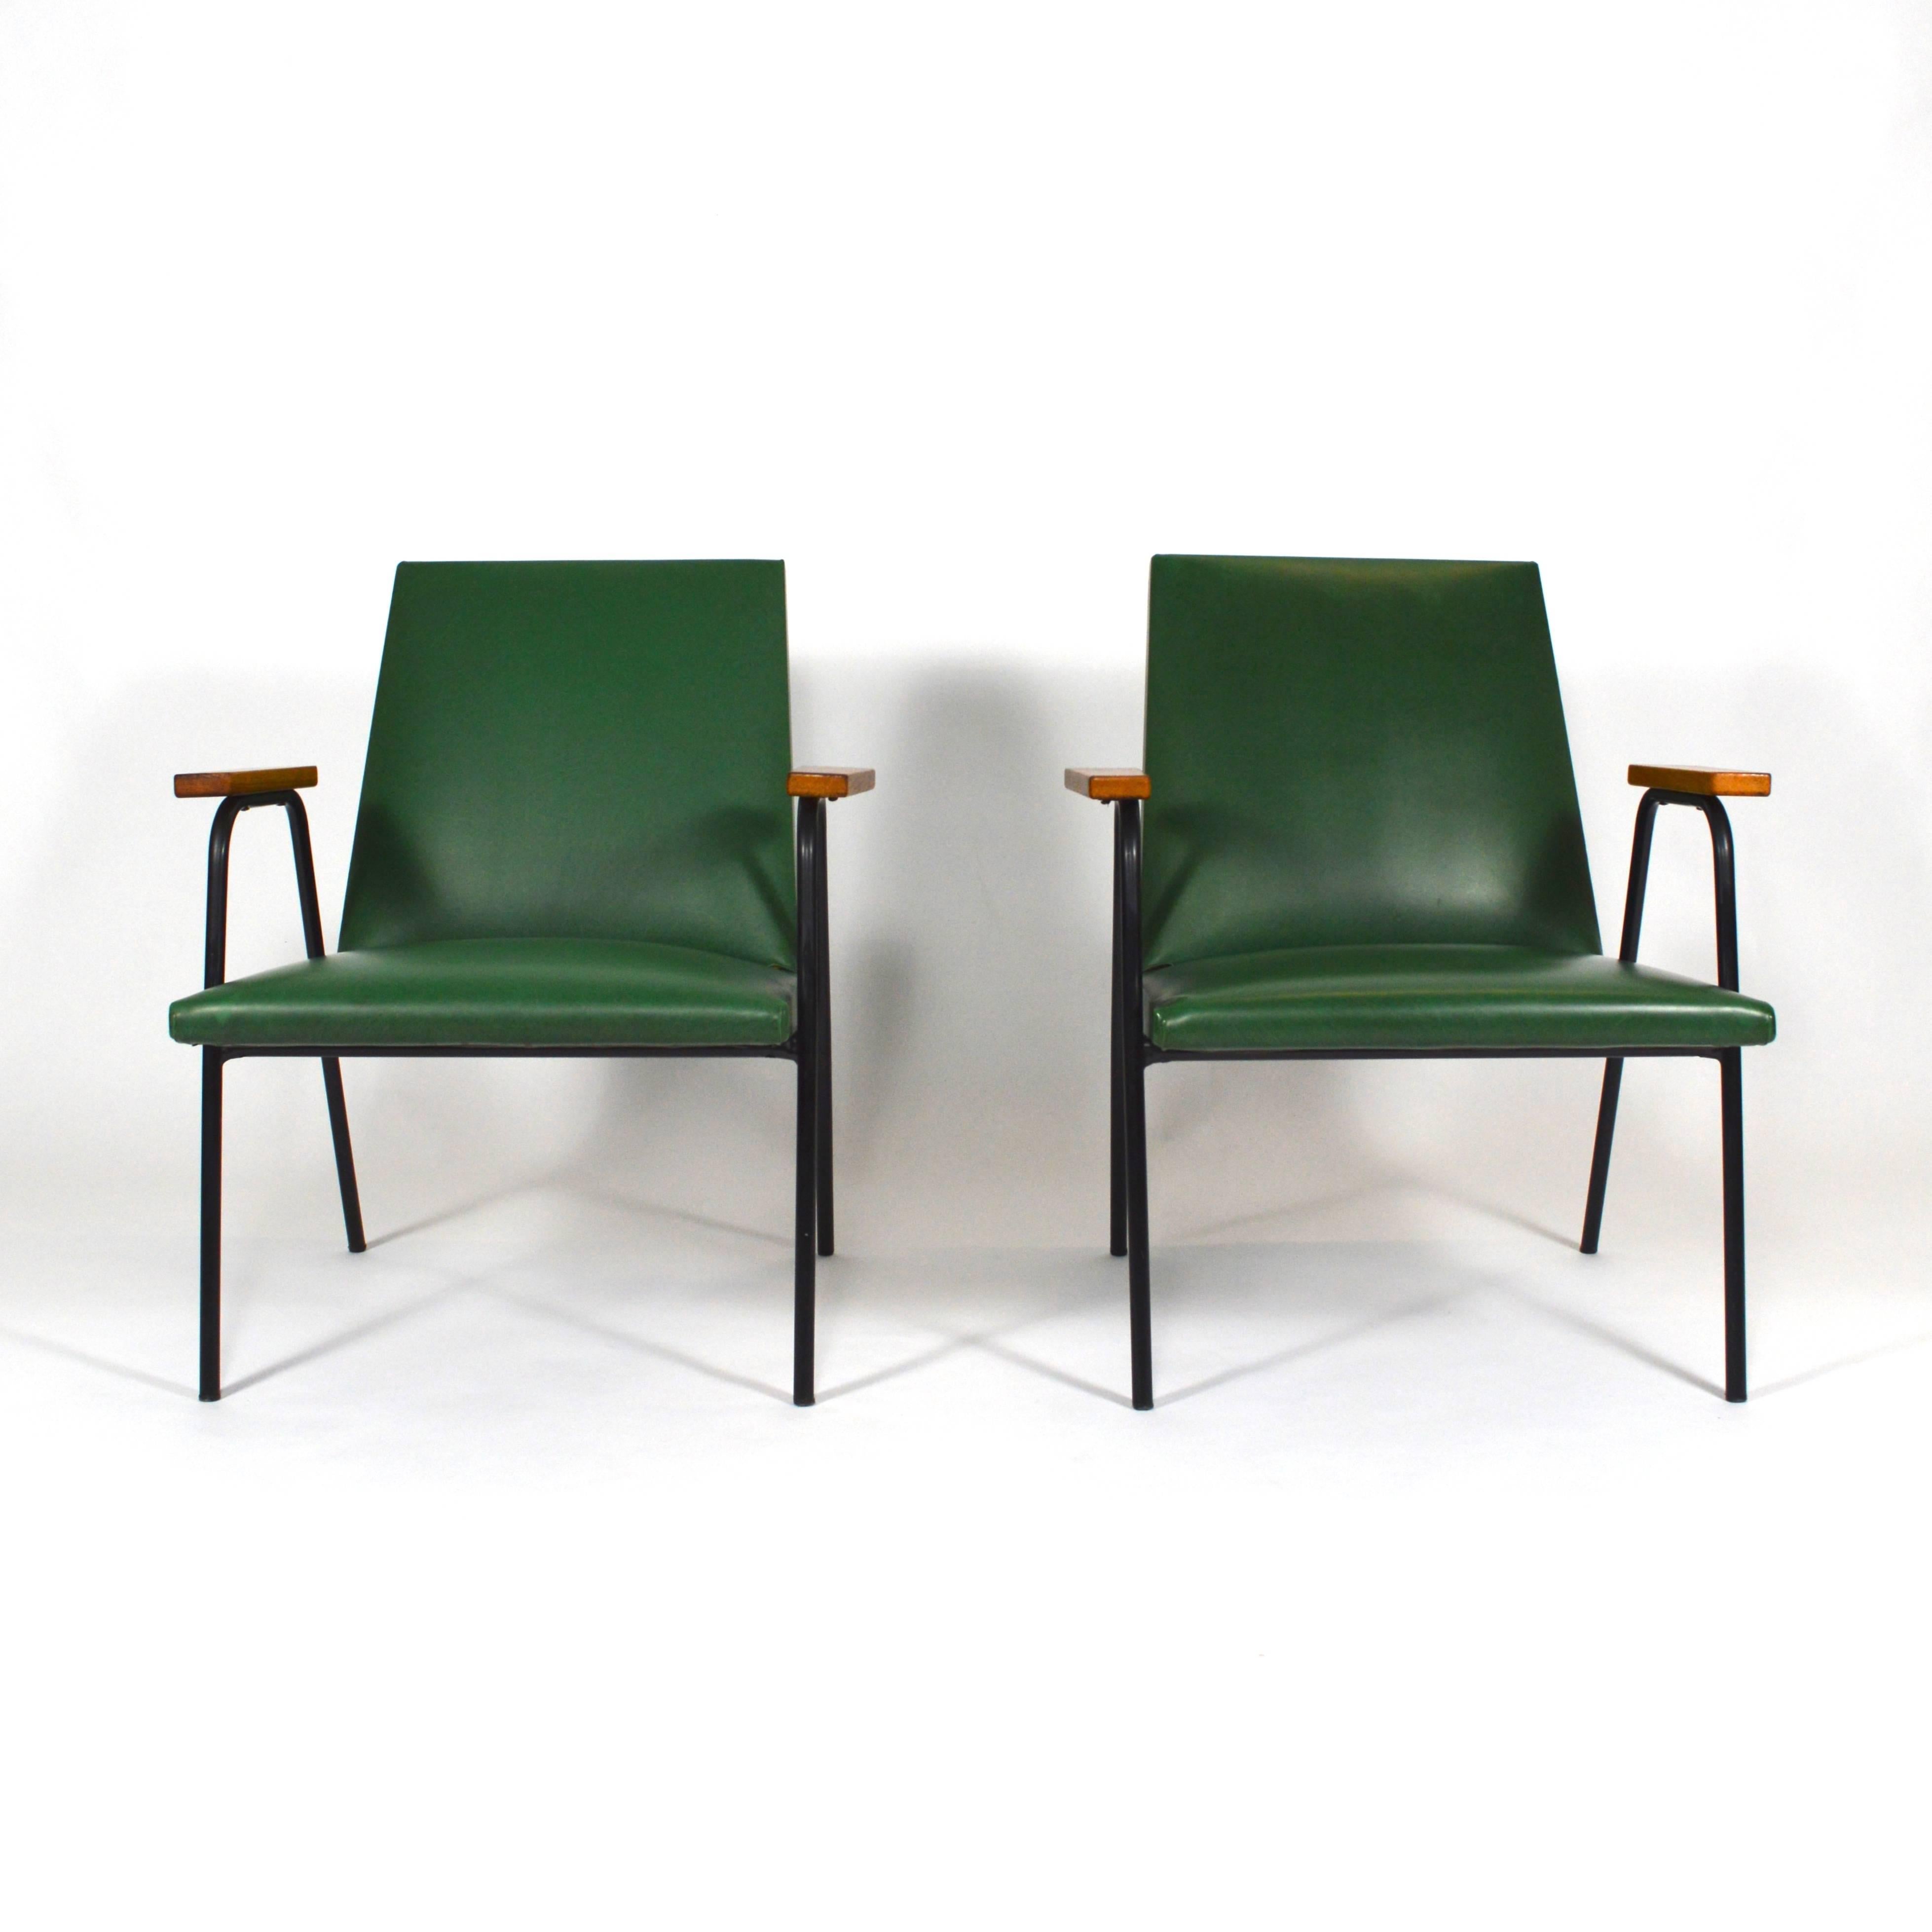 Very minimalistic but elegant pair of lounge chairs, France, 1950s-1960s. 
The armrests are made of solid birchwood, the frame is made of black lacquered metal and the upholstery is a very nice deep green faux leather.
The chairs are in original